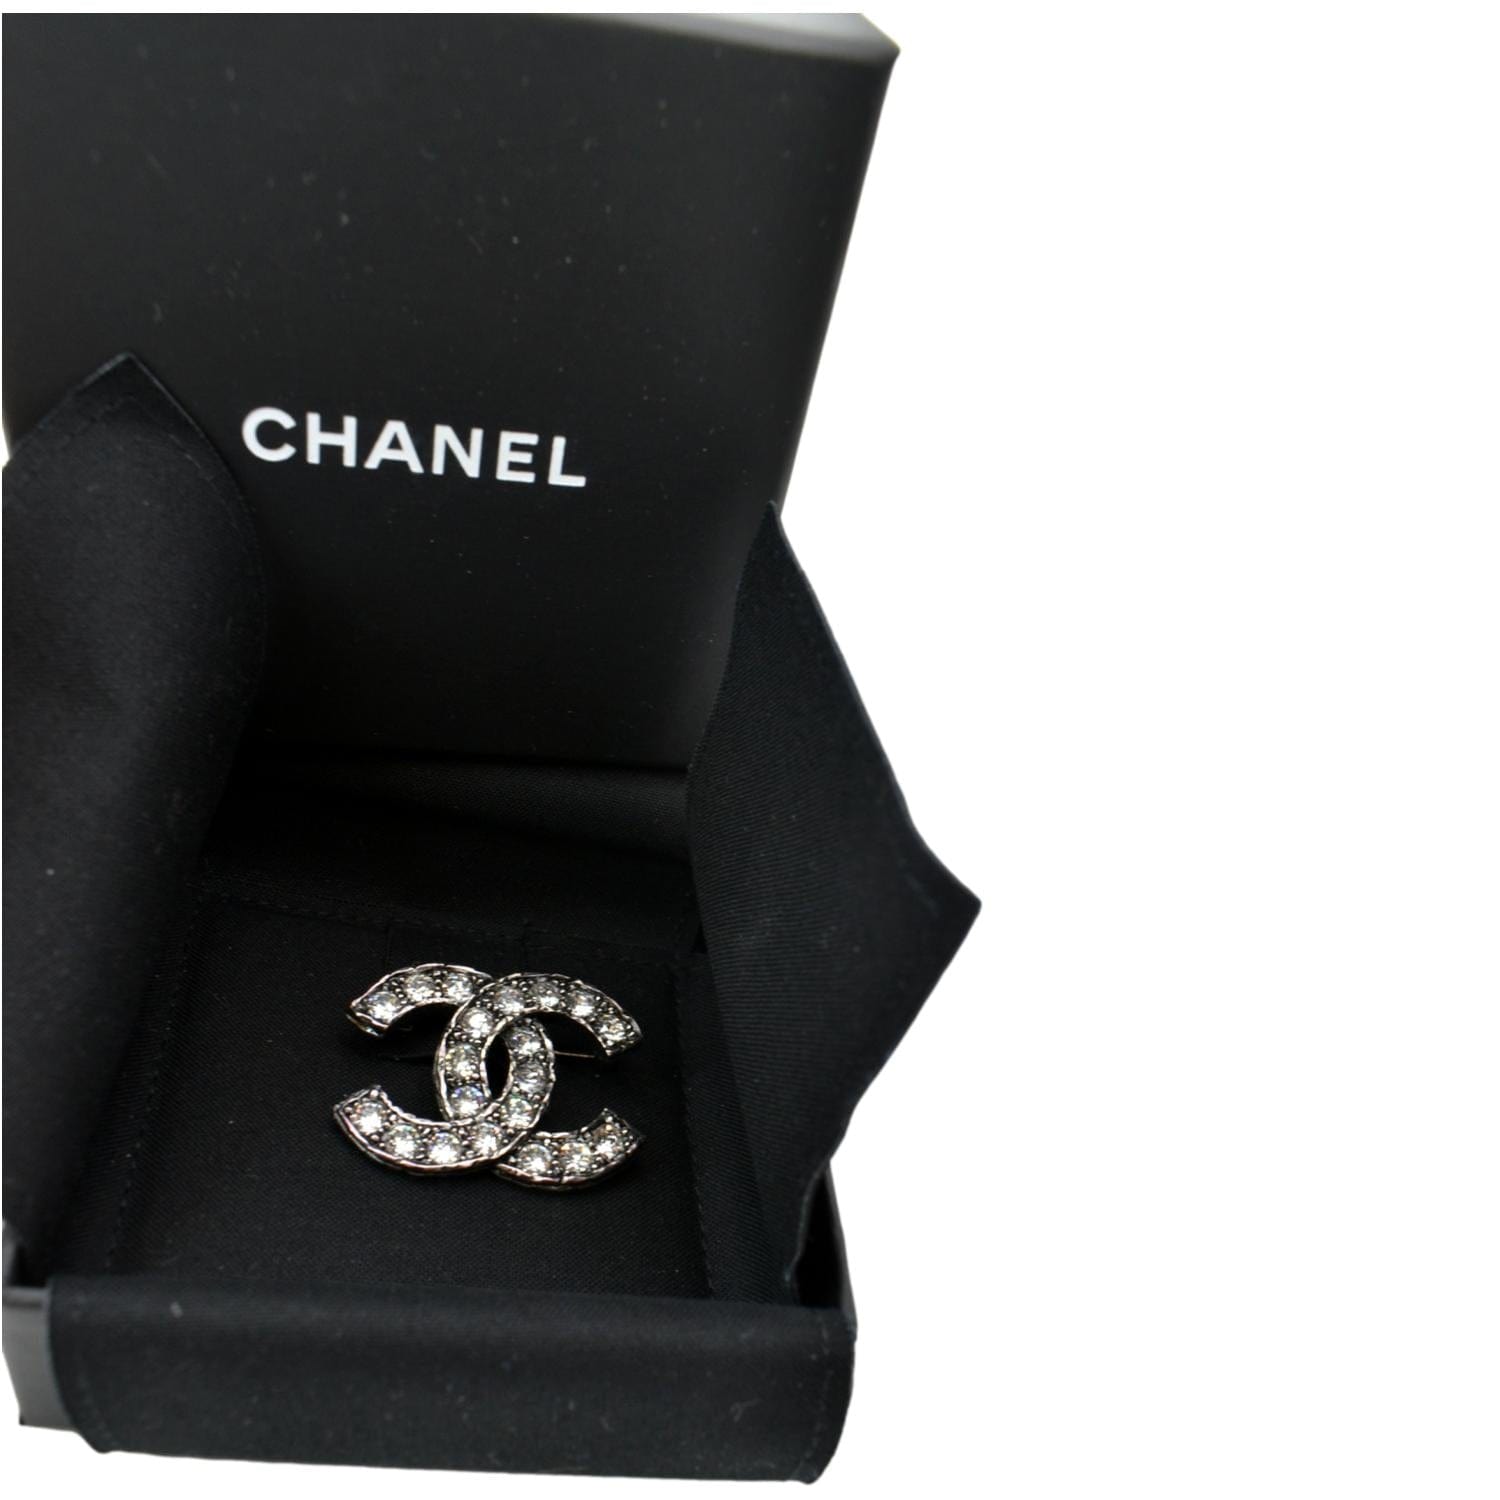 Sold at Auction: AUTHENTIC CHANEL – BROOCH